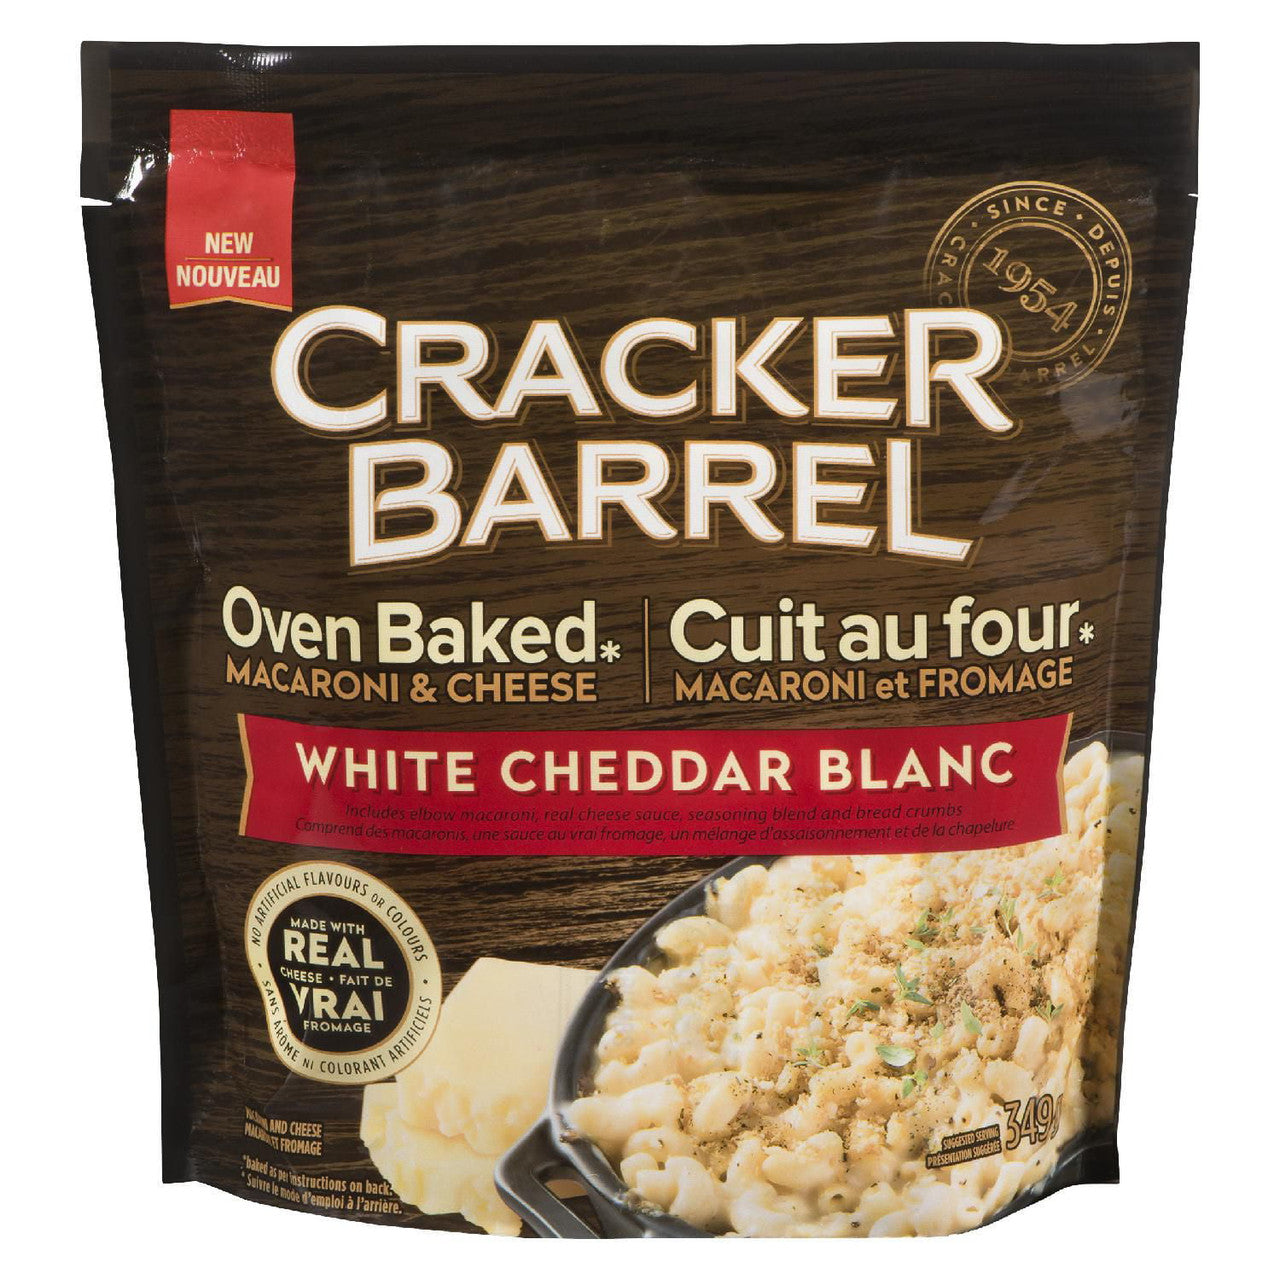 Cracker Barrel Oven Baked Macaroni & Cheese, White Cheddar Cheese, 349g/12 oz. Bag {Imported from Canada}